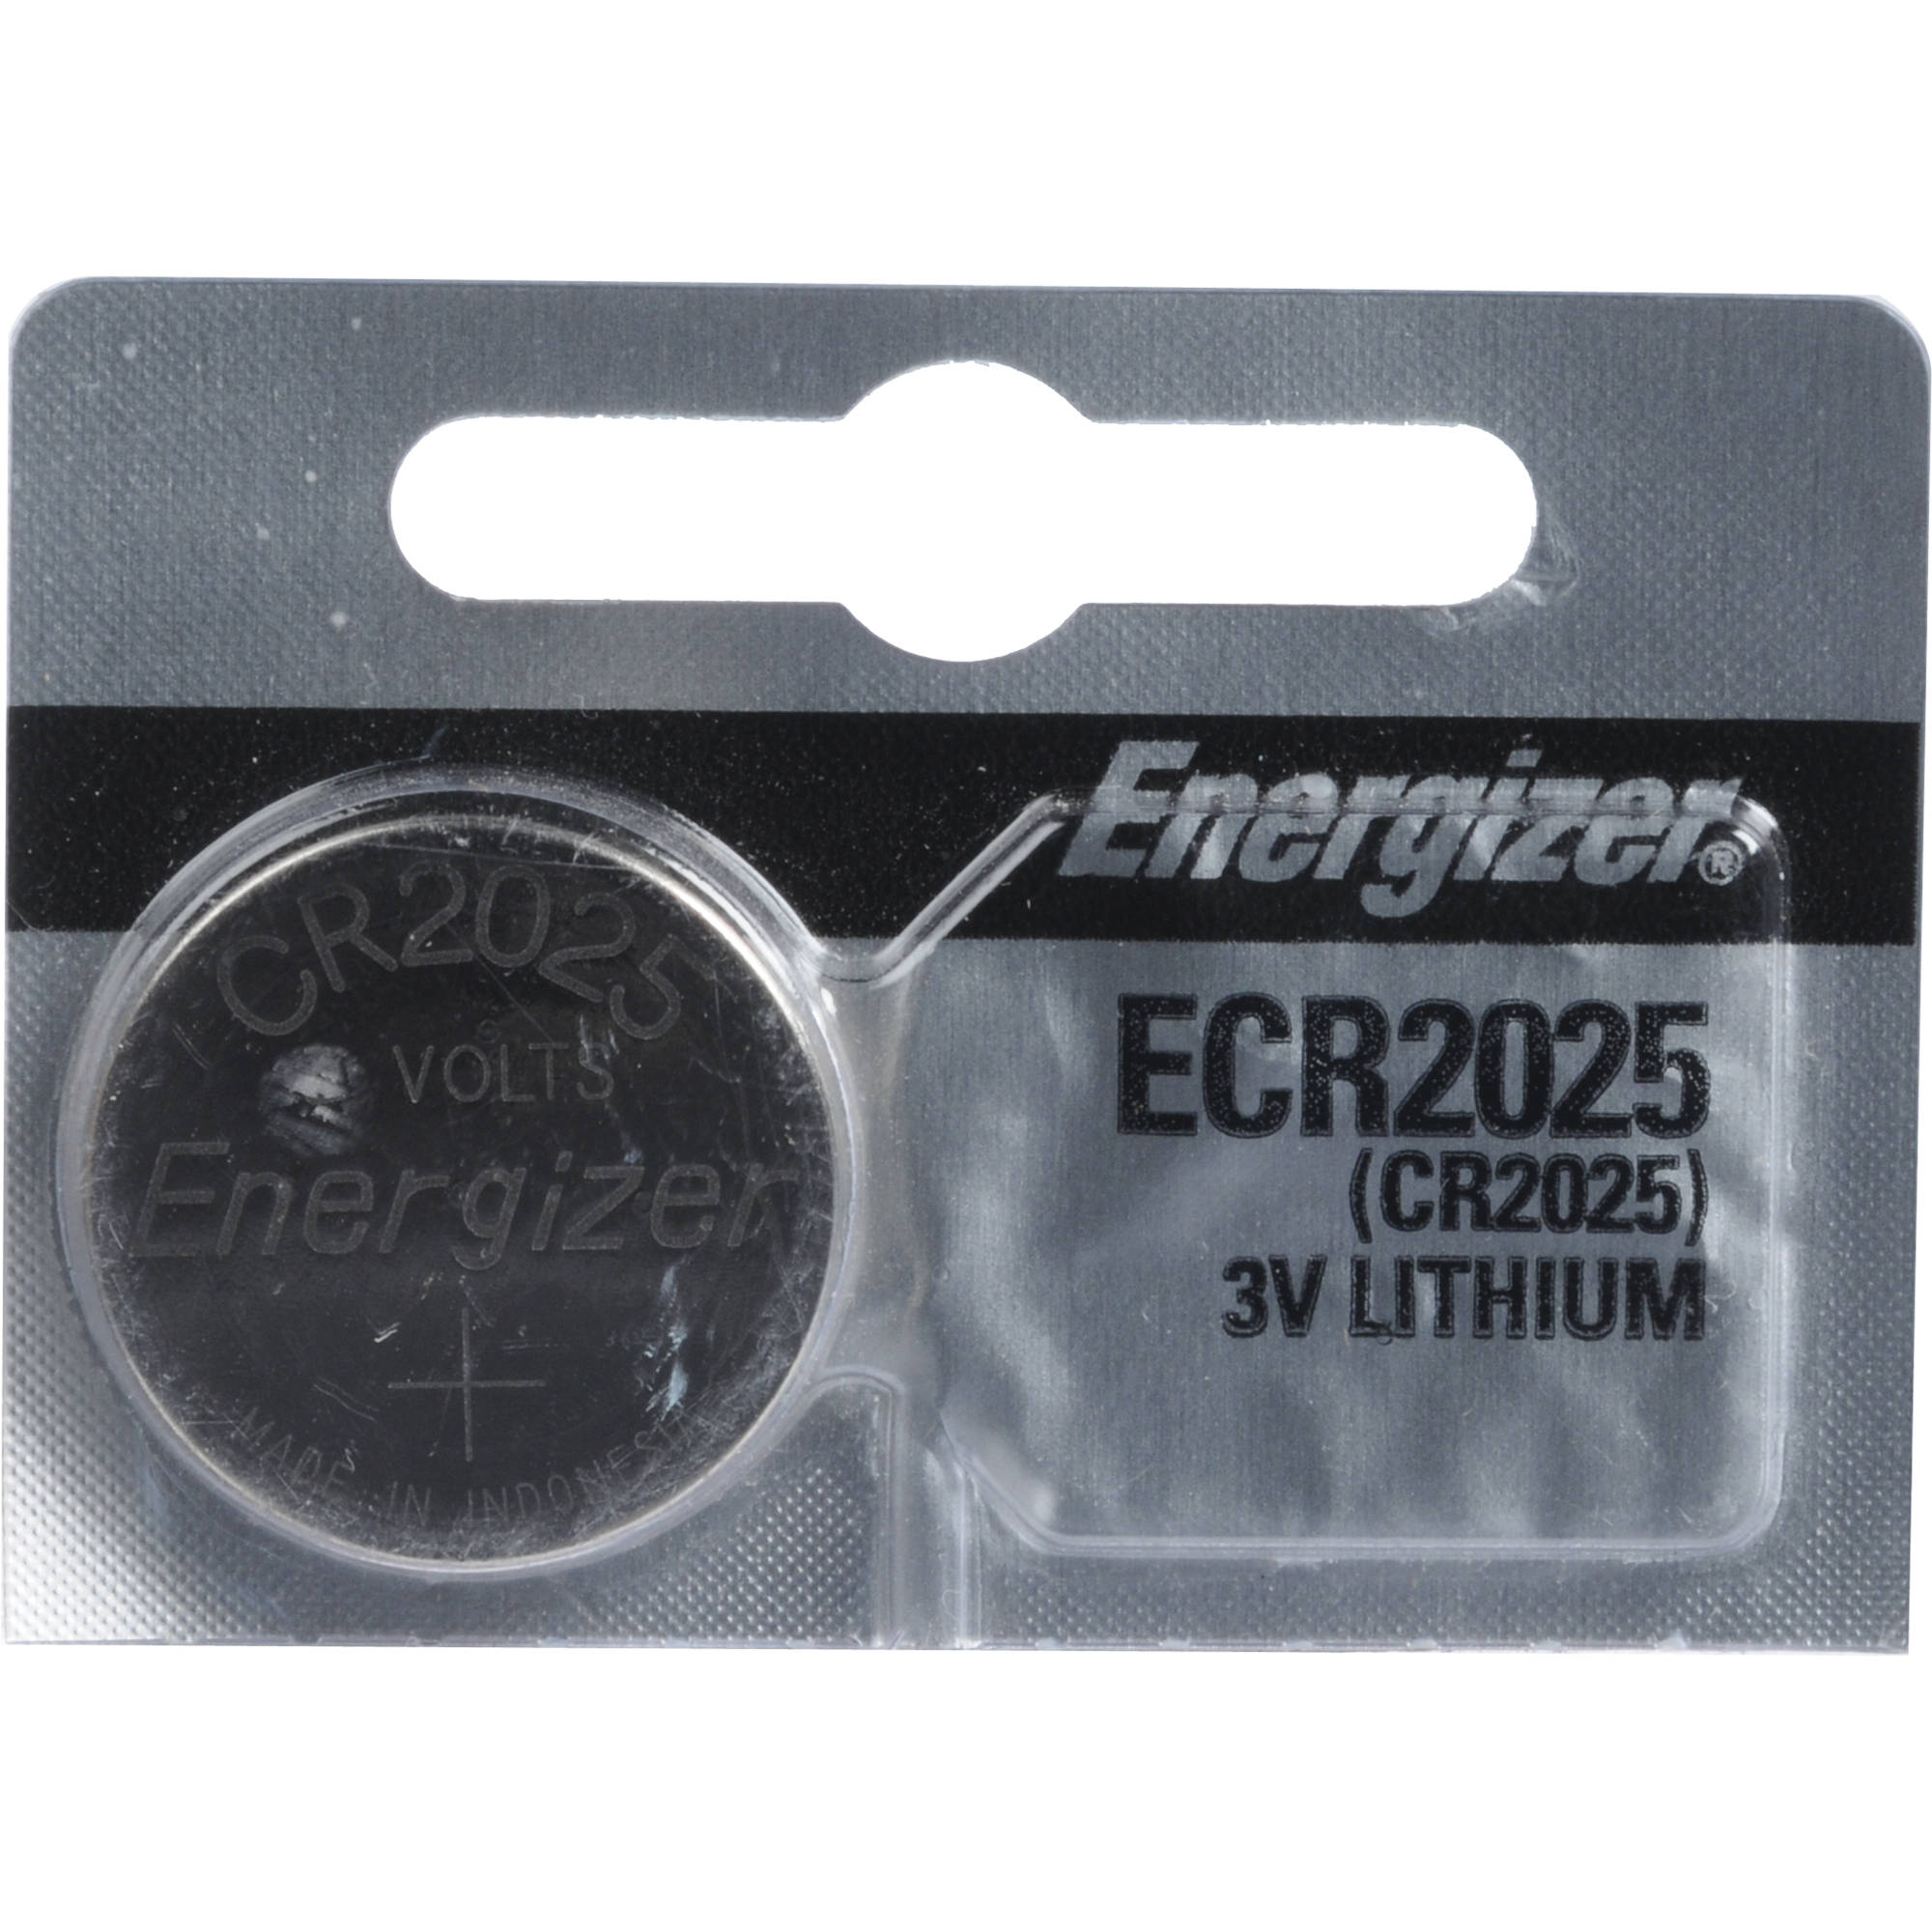 Energizer CR2025 Lithium Coin Battery 